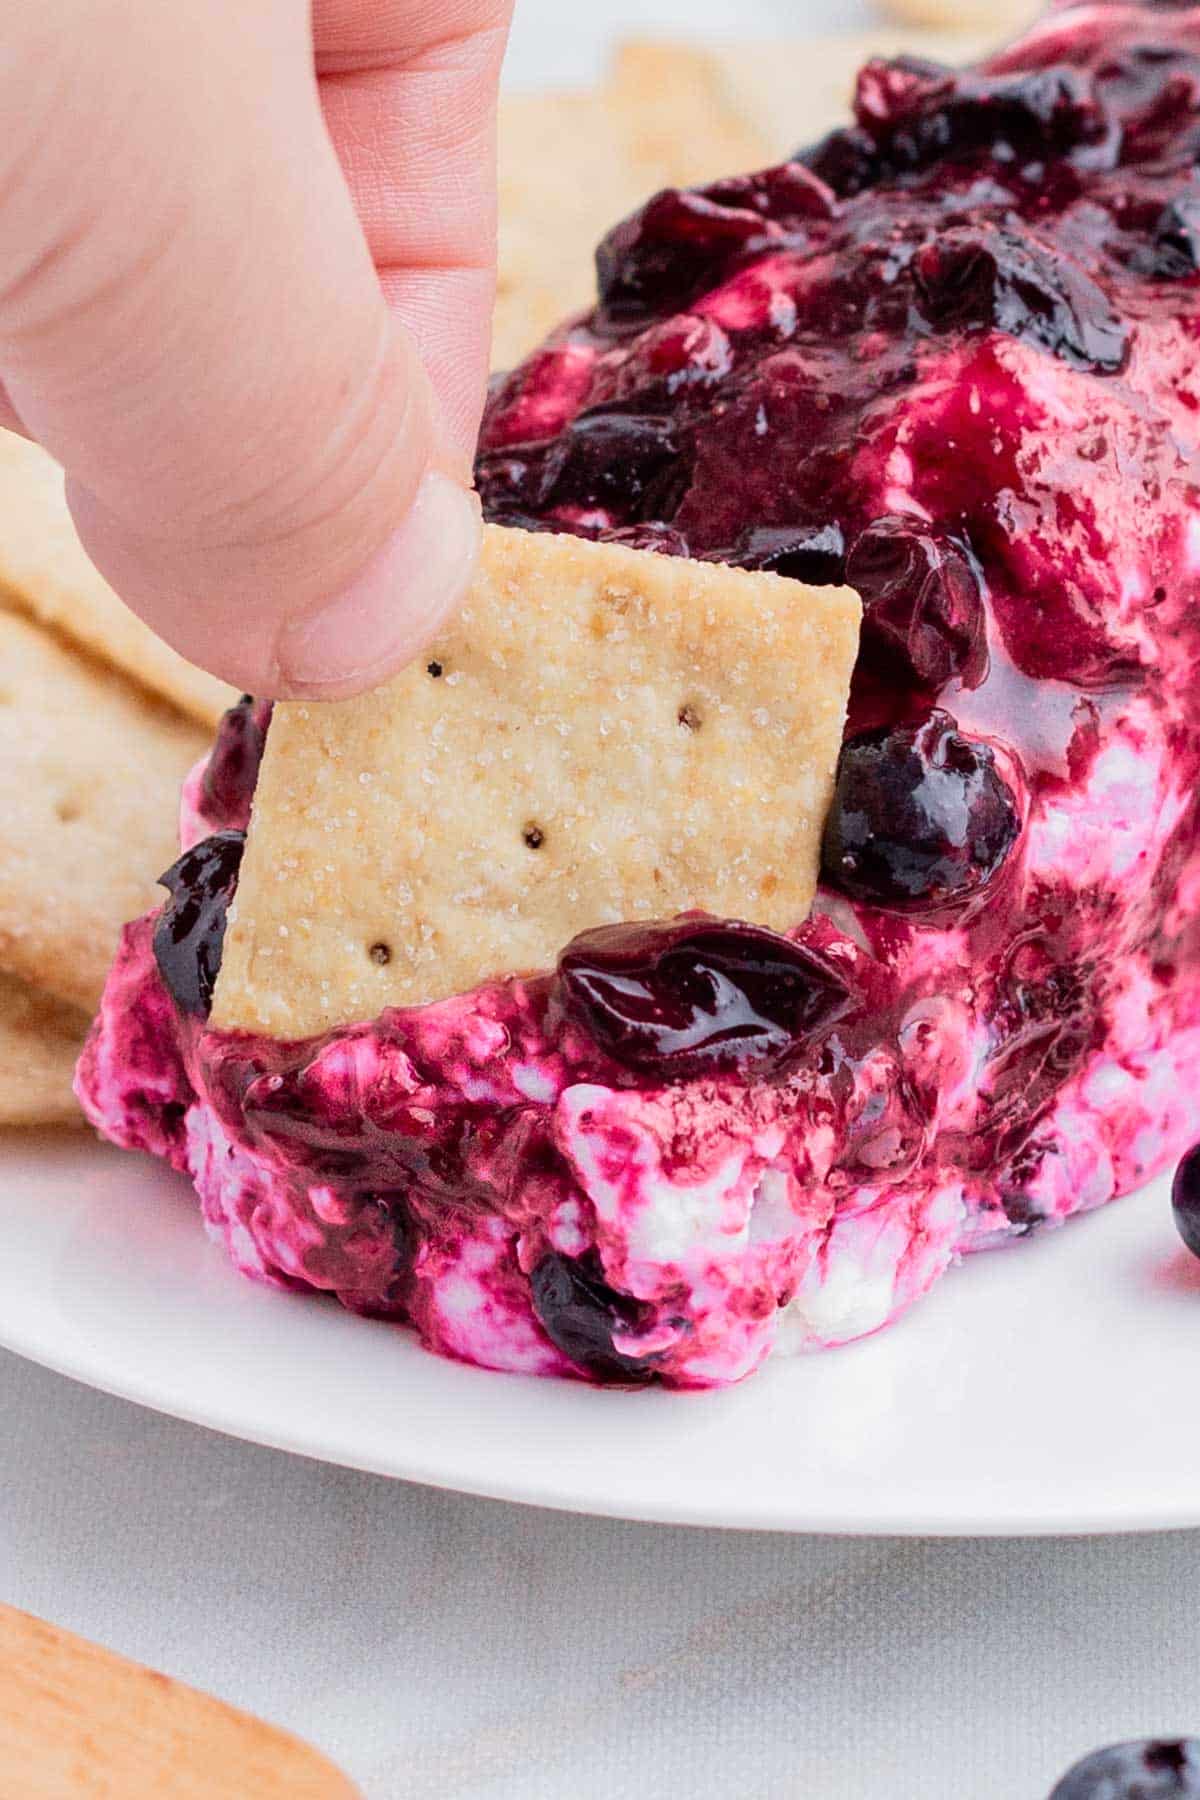 A cracker is dipped into a blueberry goat cheese log.